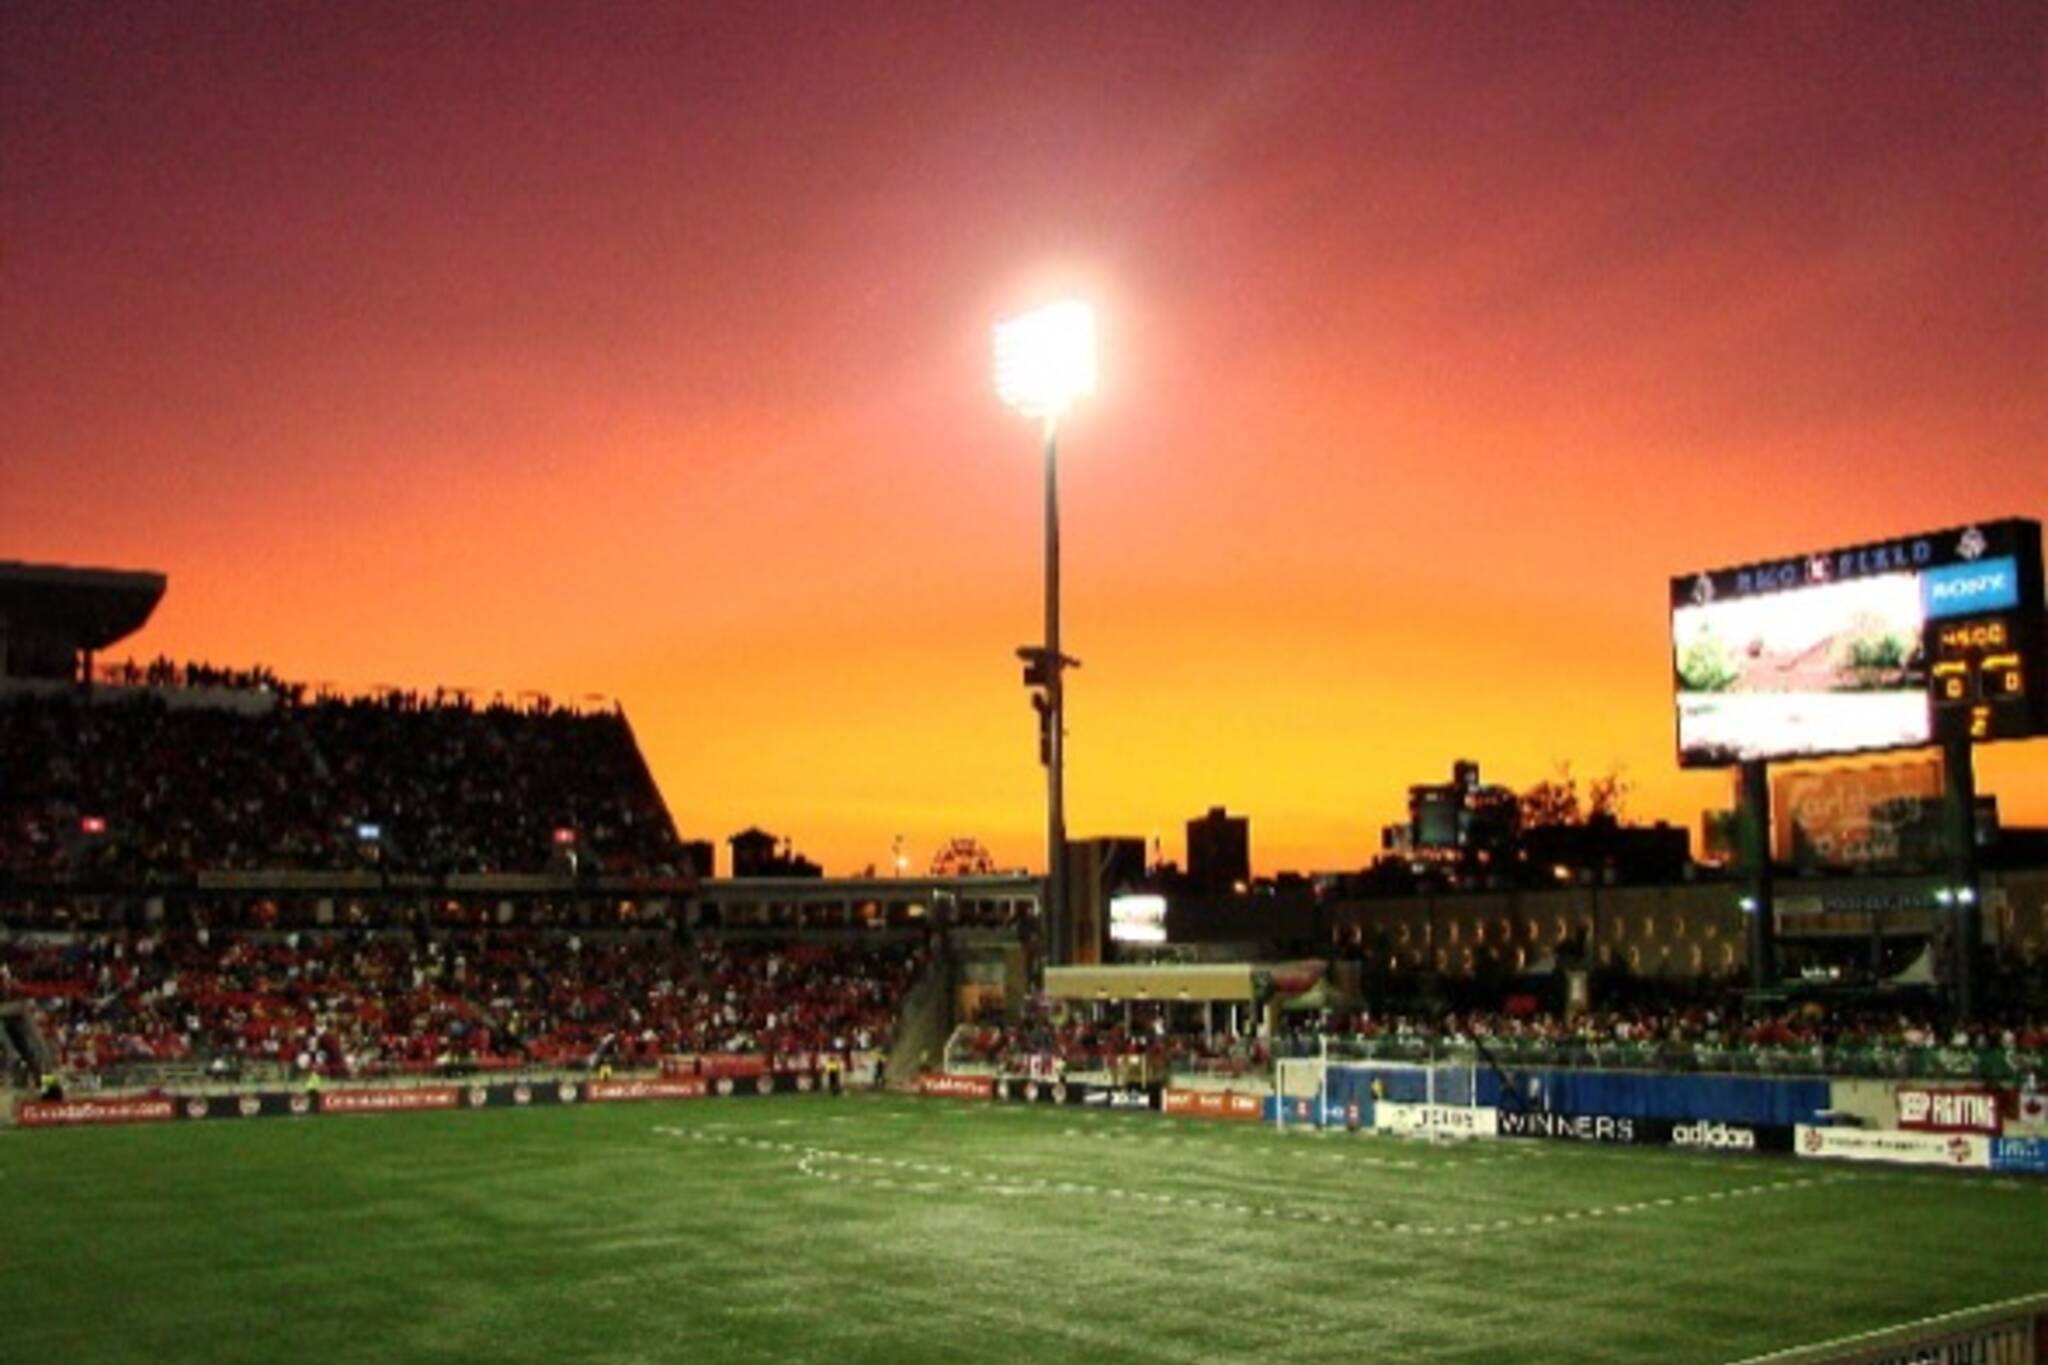 Spectacular sunset over BMO Field